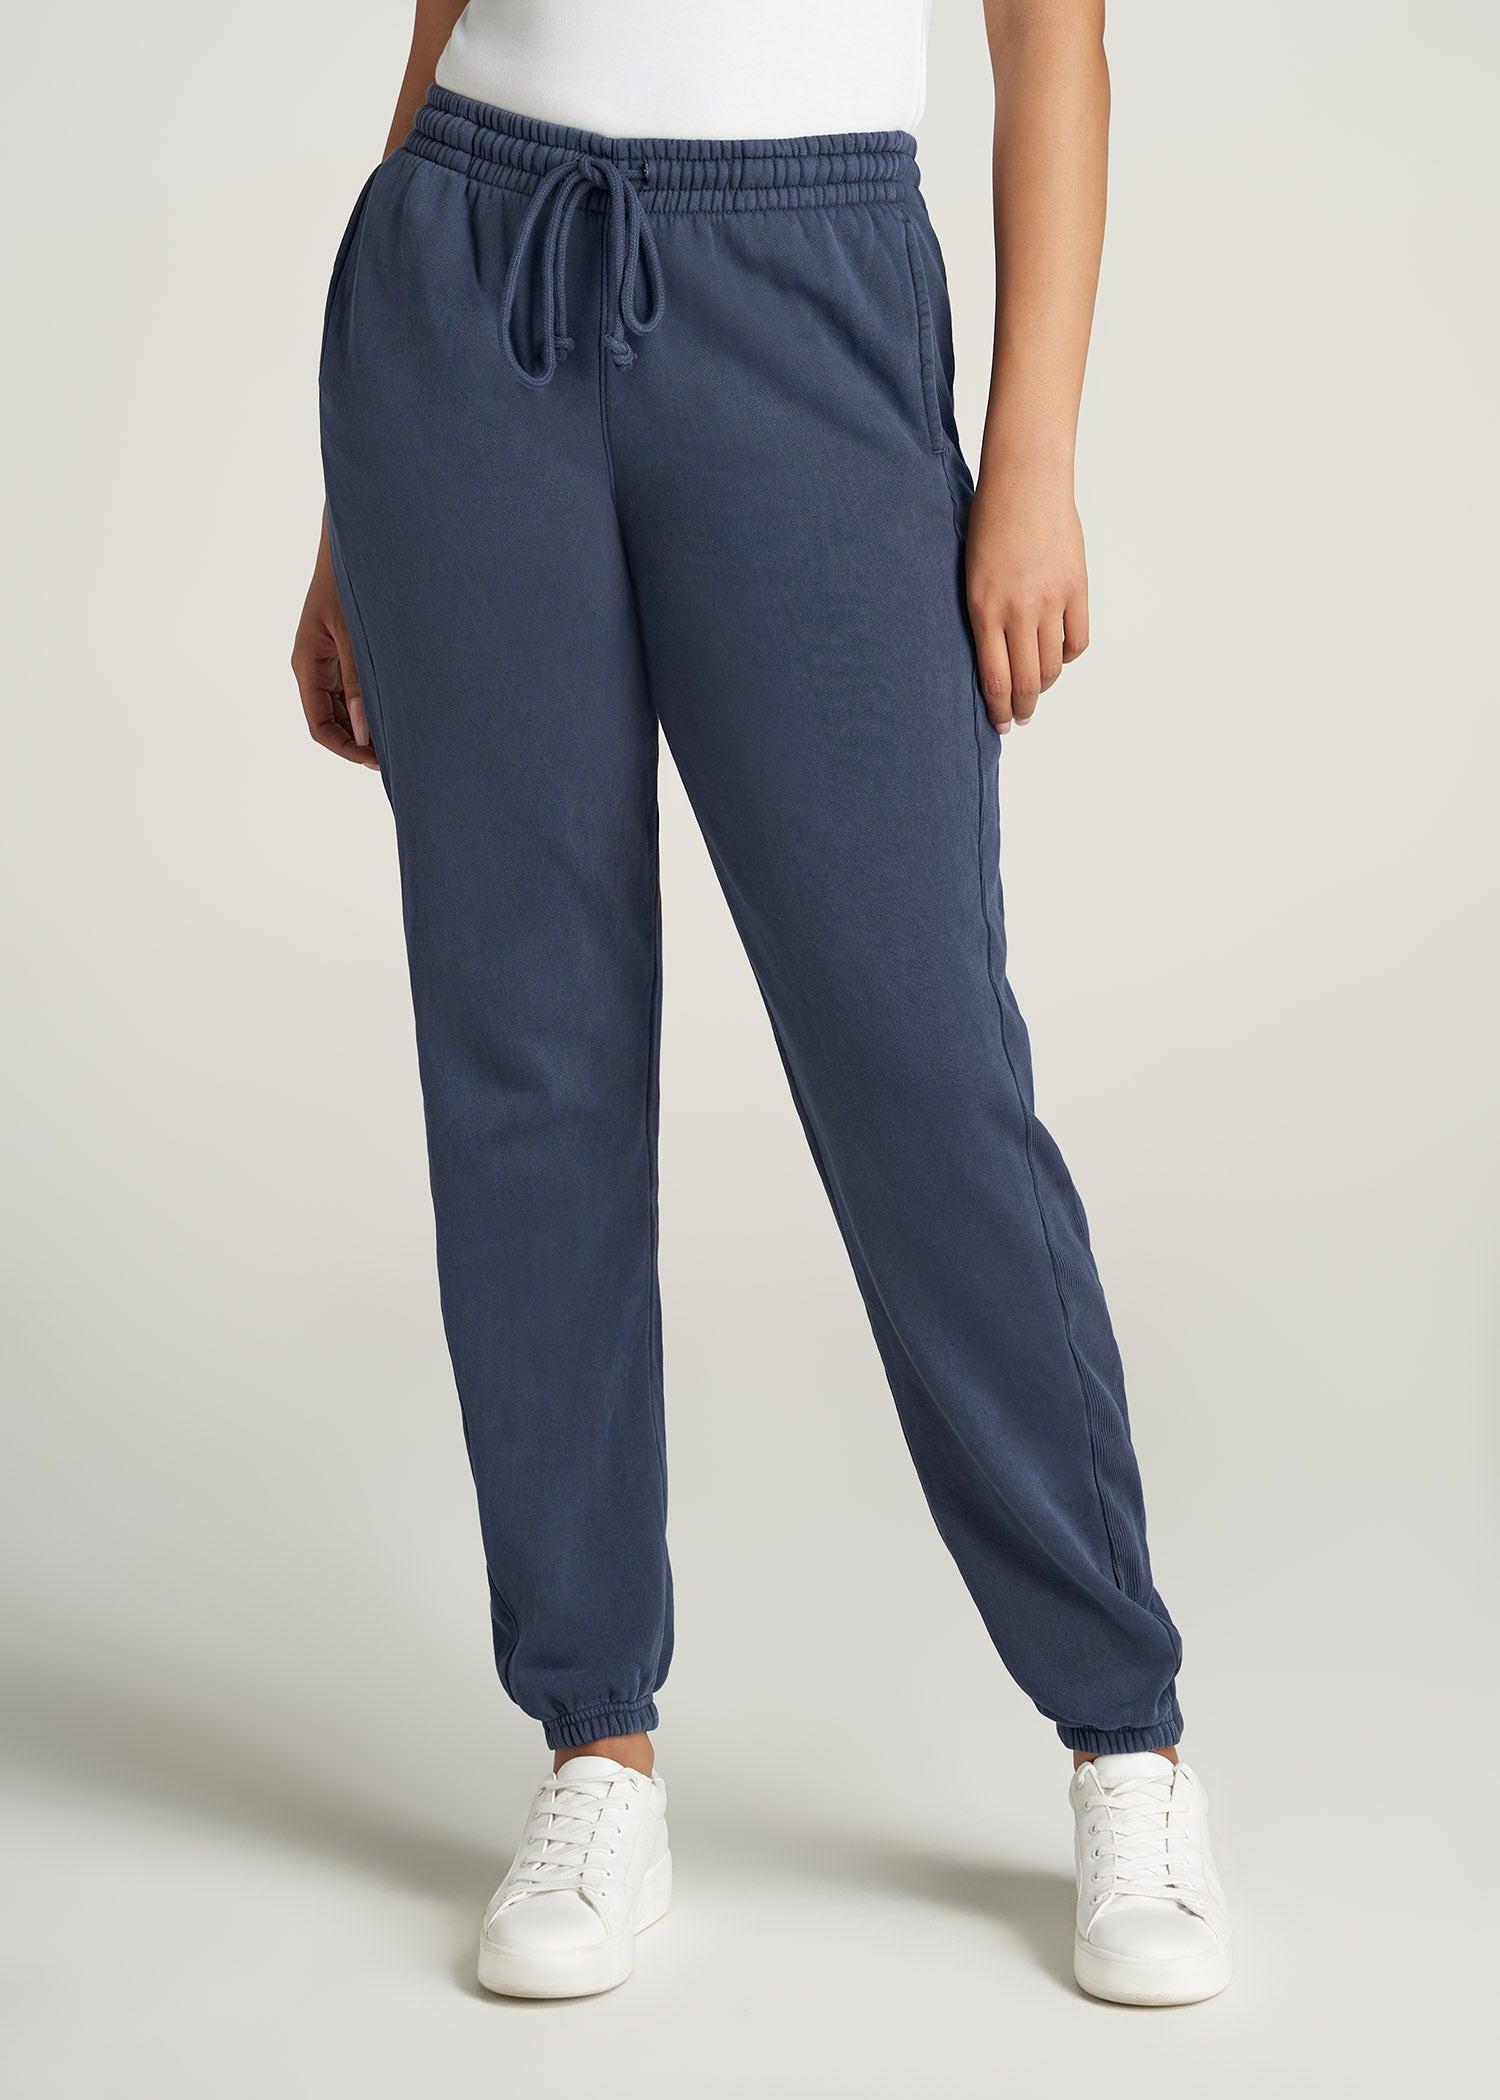 Blue Joggers for Women